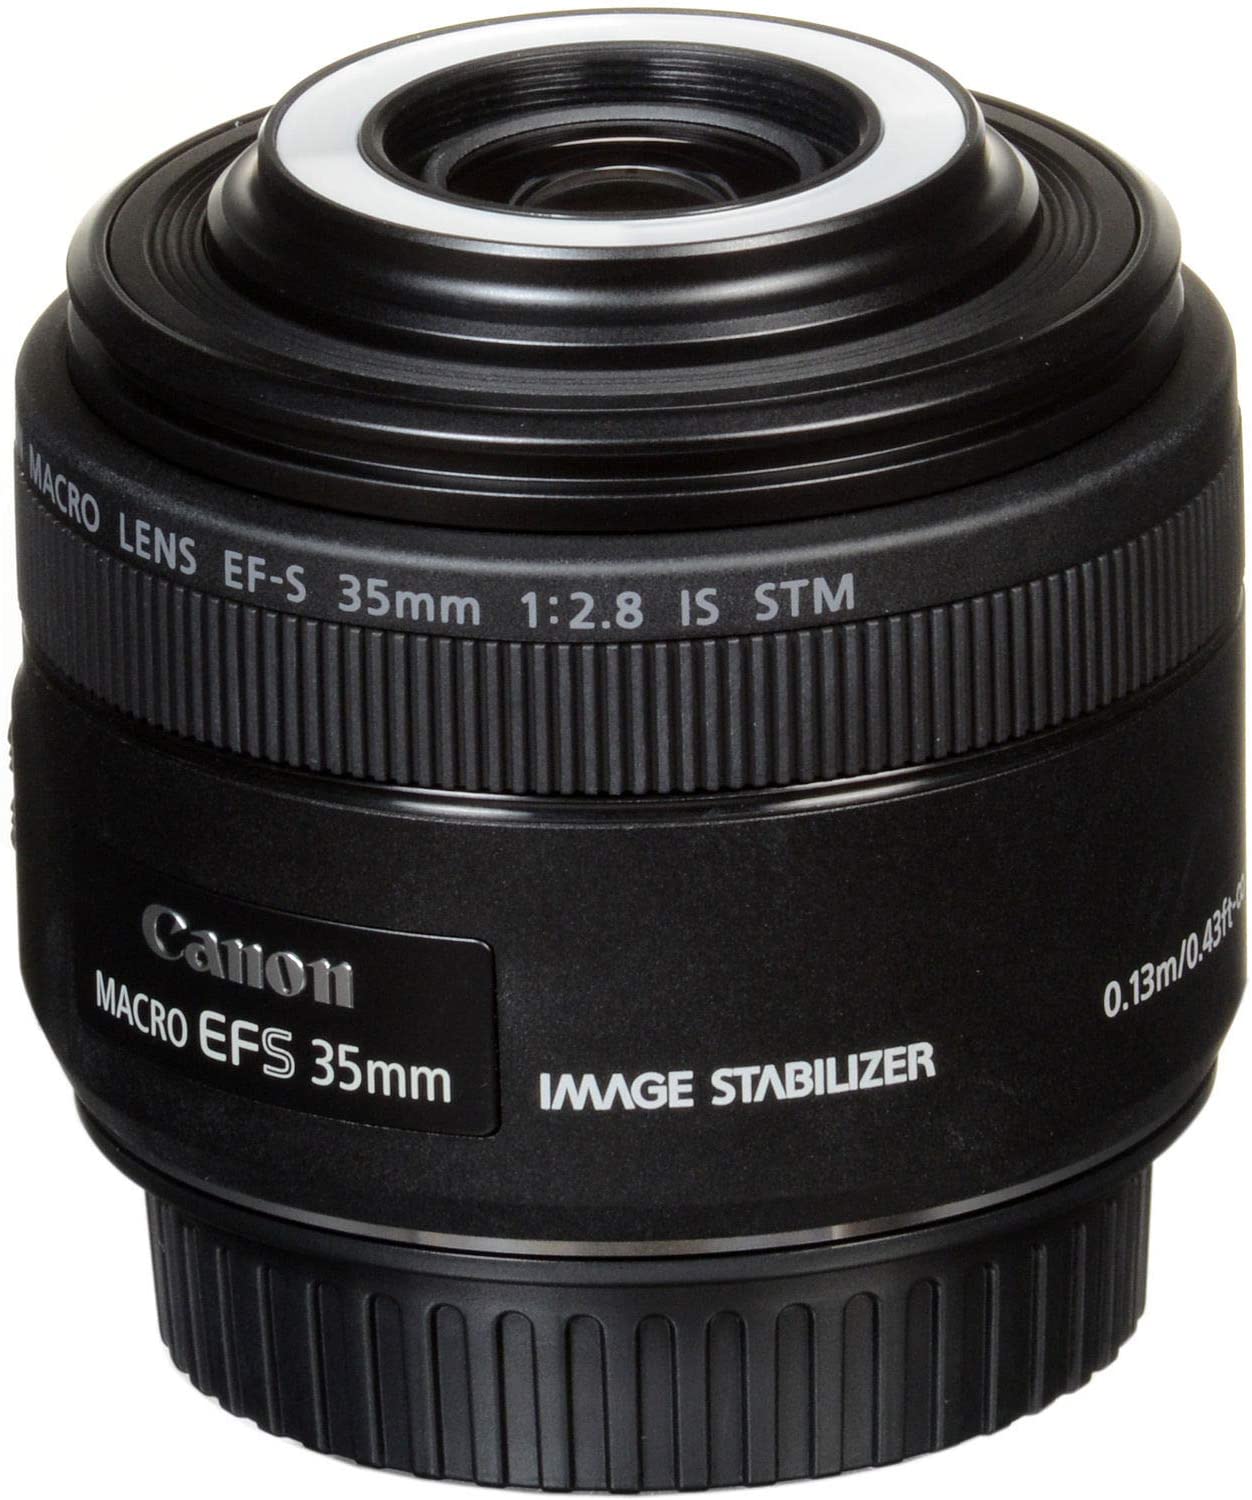 Canon EF-S 35/2.8 Macro IS STM, Lens, Lens, Filter Reviews and Comments